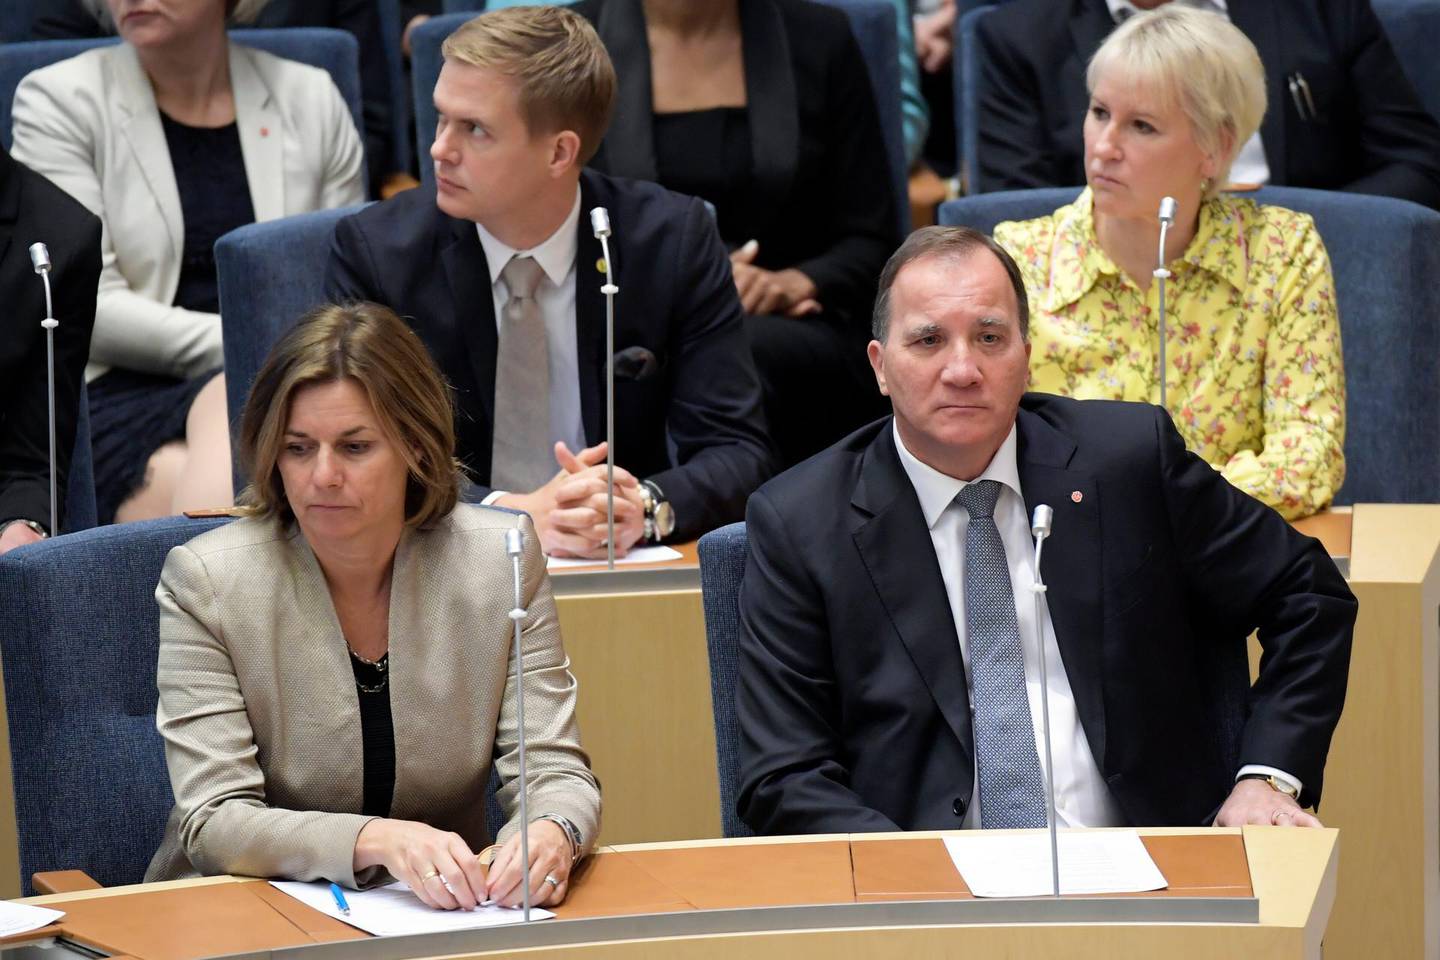 Swedish Prime Minister Stefan Lofven, right, attends parliament during a vote of confidence in the Swedish Parliament Riksdagen, Tuesday Sept. 25, 2018. The prime minister lost a vote of confidence in parliament, meaning he will have to step down. He will continue as caretaker prime minister until a new government can be formed. (Anders Wiklund/TT via AP)